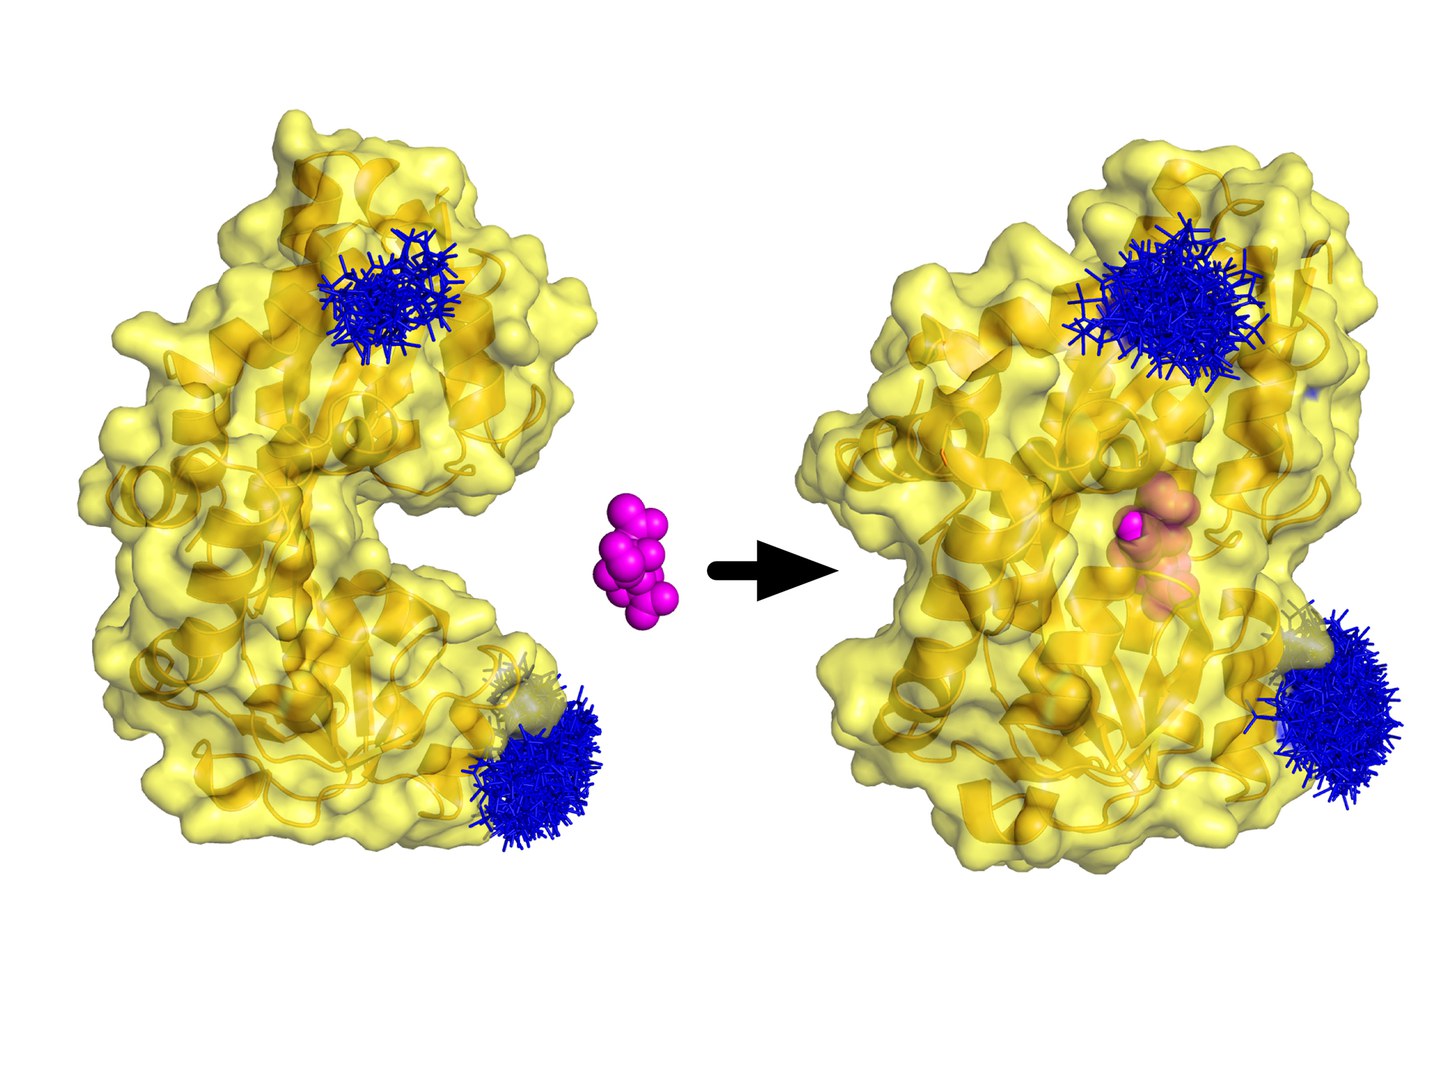 The P domain (yellow) patrols with its mouth open